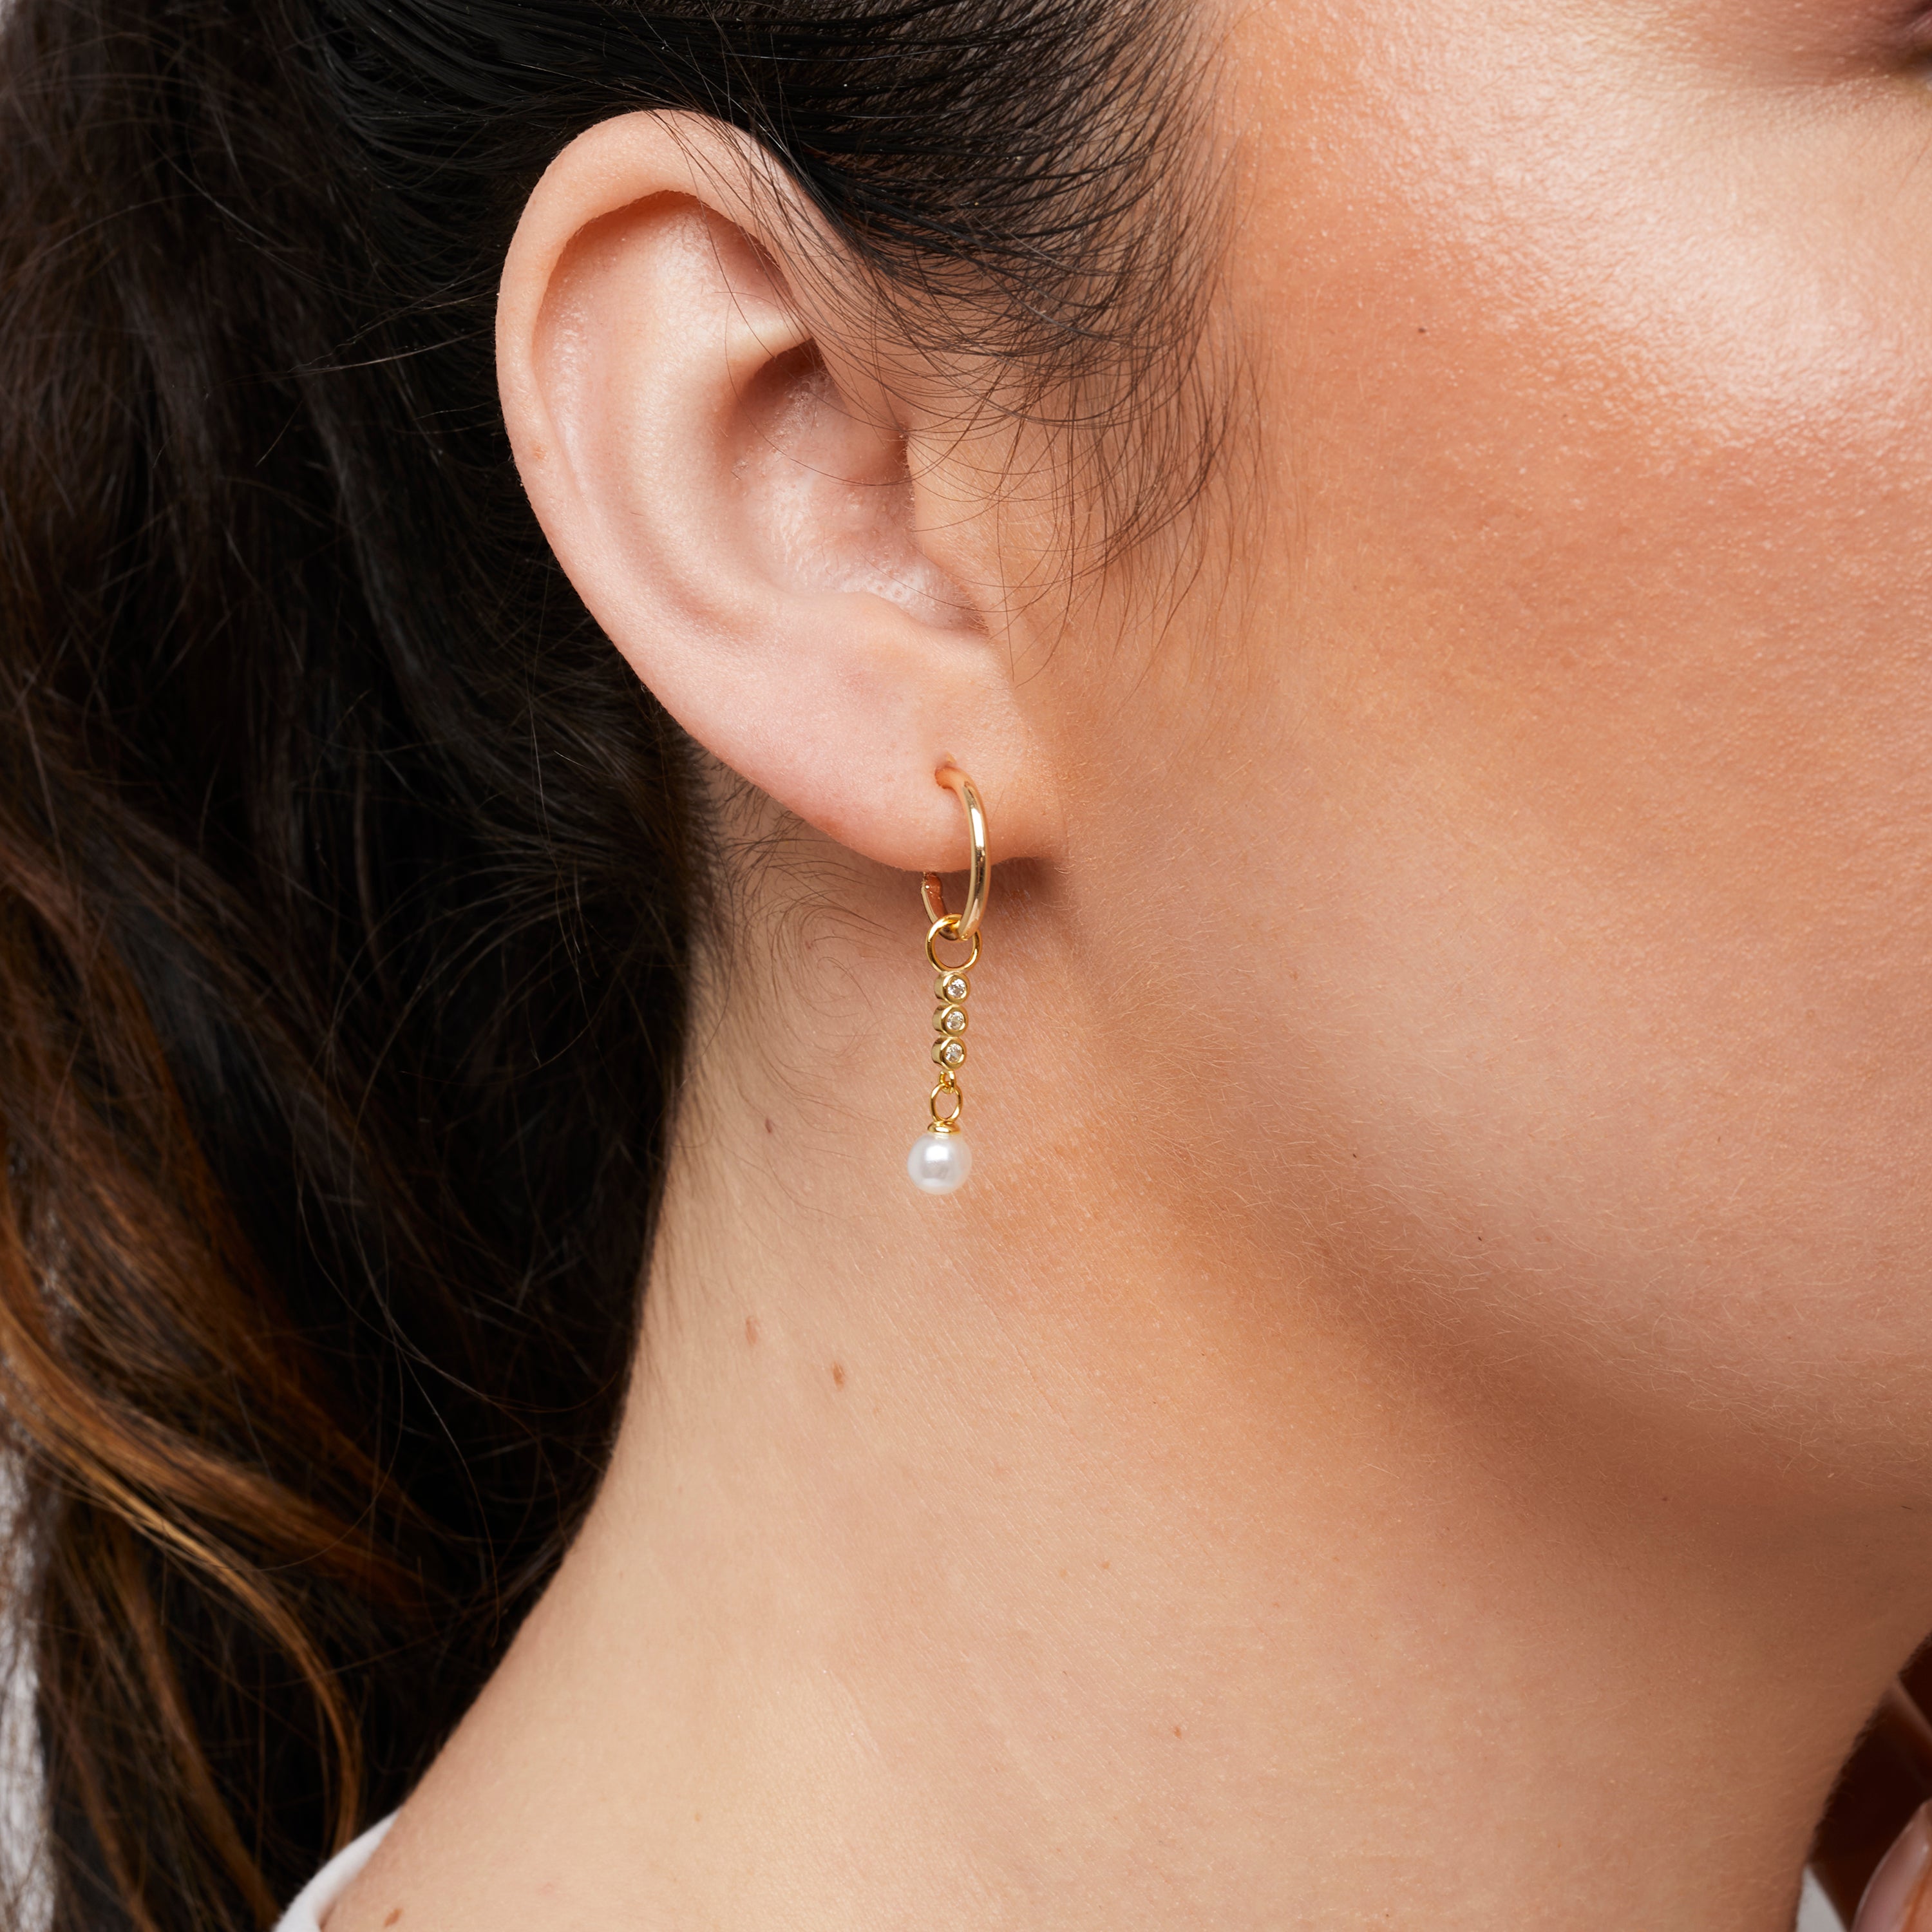 A model wearing the Pearl Dangle Hoop Charms are made with high-quality materials, including 18K gold plating over 925 Sterling Silver. These charms are both non-tarnish and water resistant. The perfect combination of style and durability.